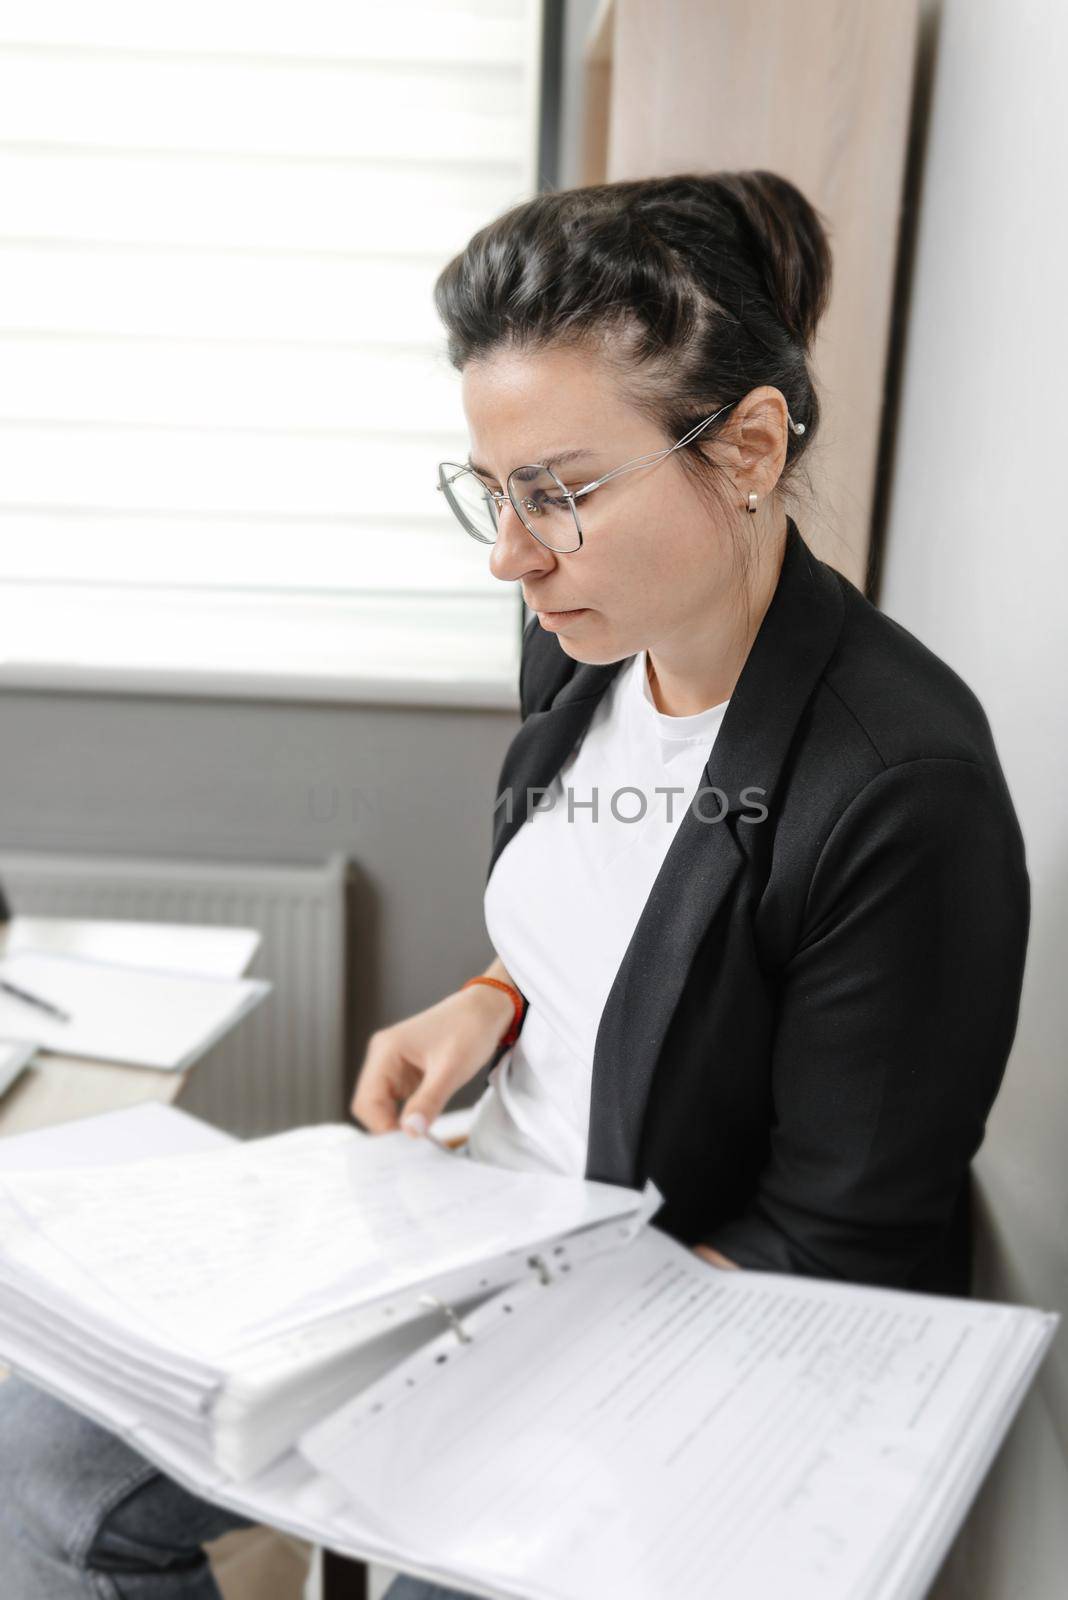 Accountant Clerk Clerk Woman. Bank counselor and auditor. Woman holding a binder of documents by gulyaevstudio